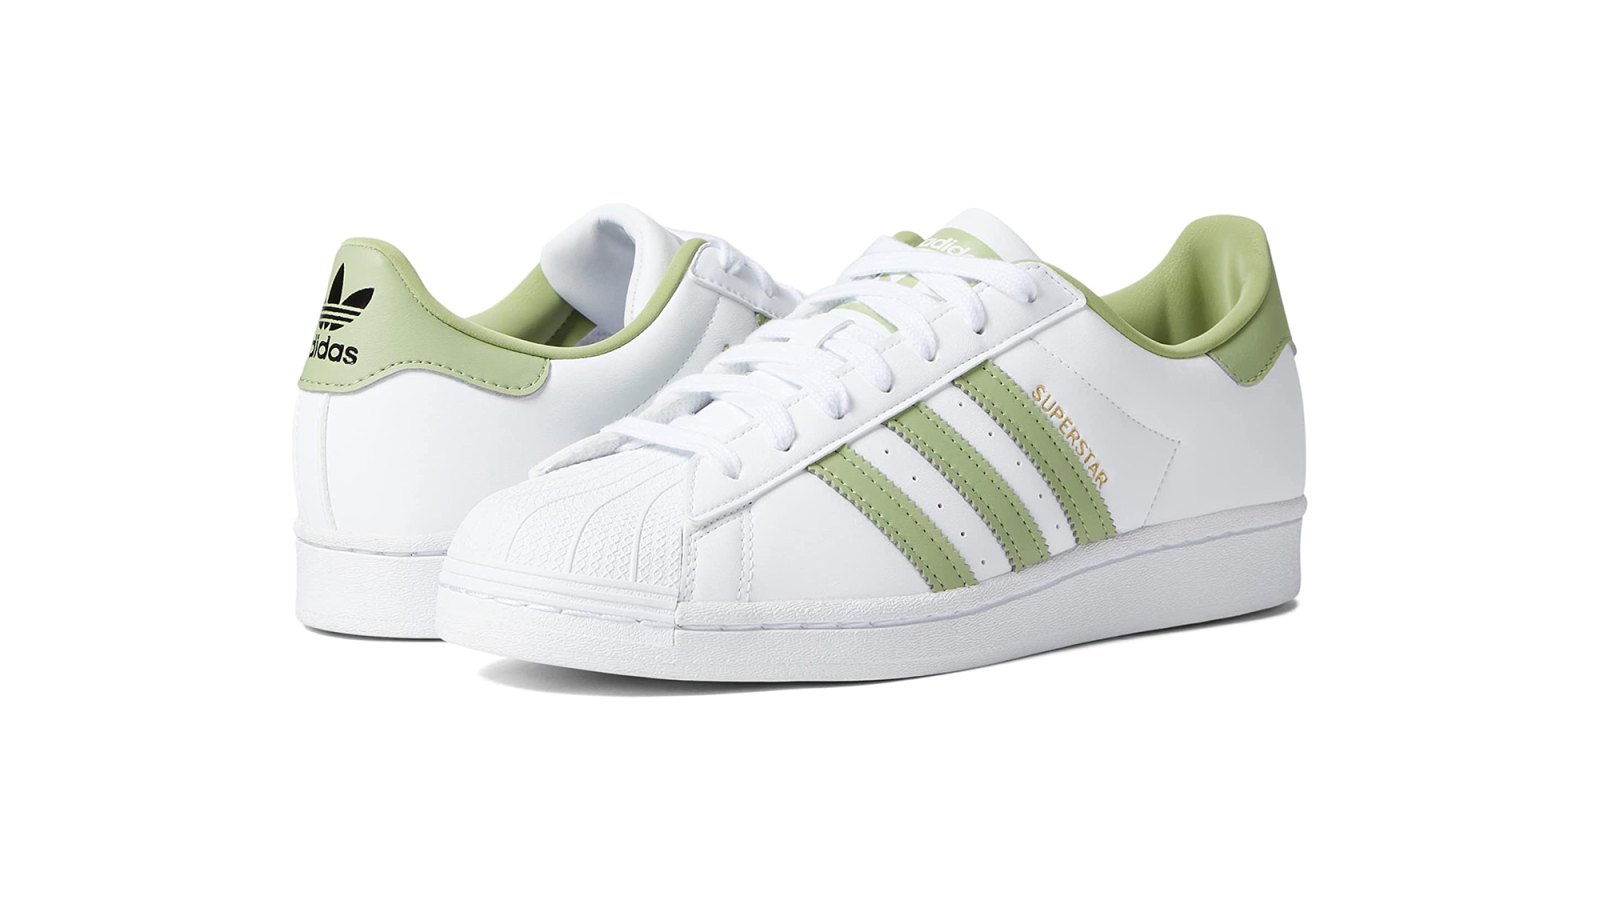 Contrapartida Recordar Cuna Adidas Classic Sneakers Have a Pop of Color That's Ideal for Spring